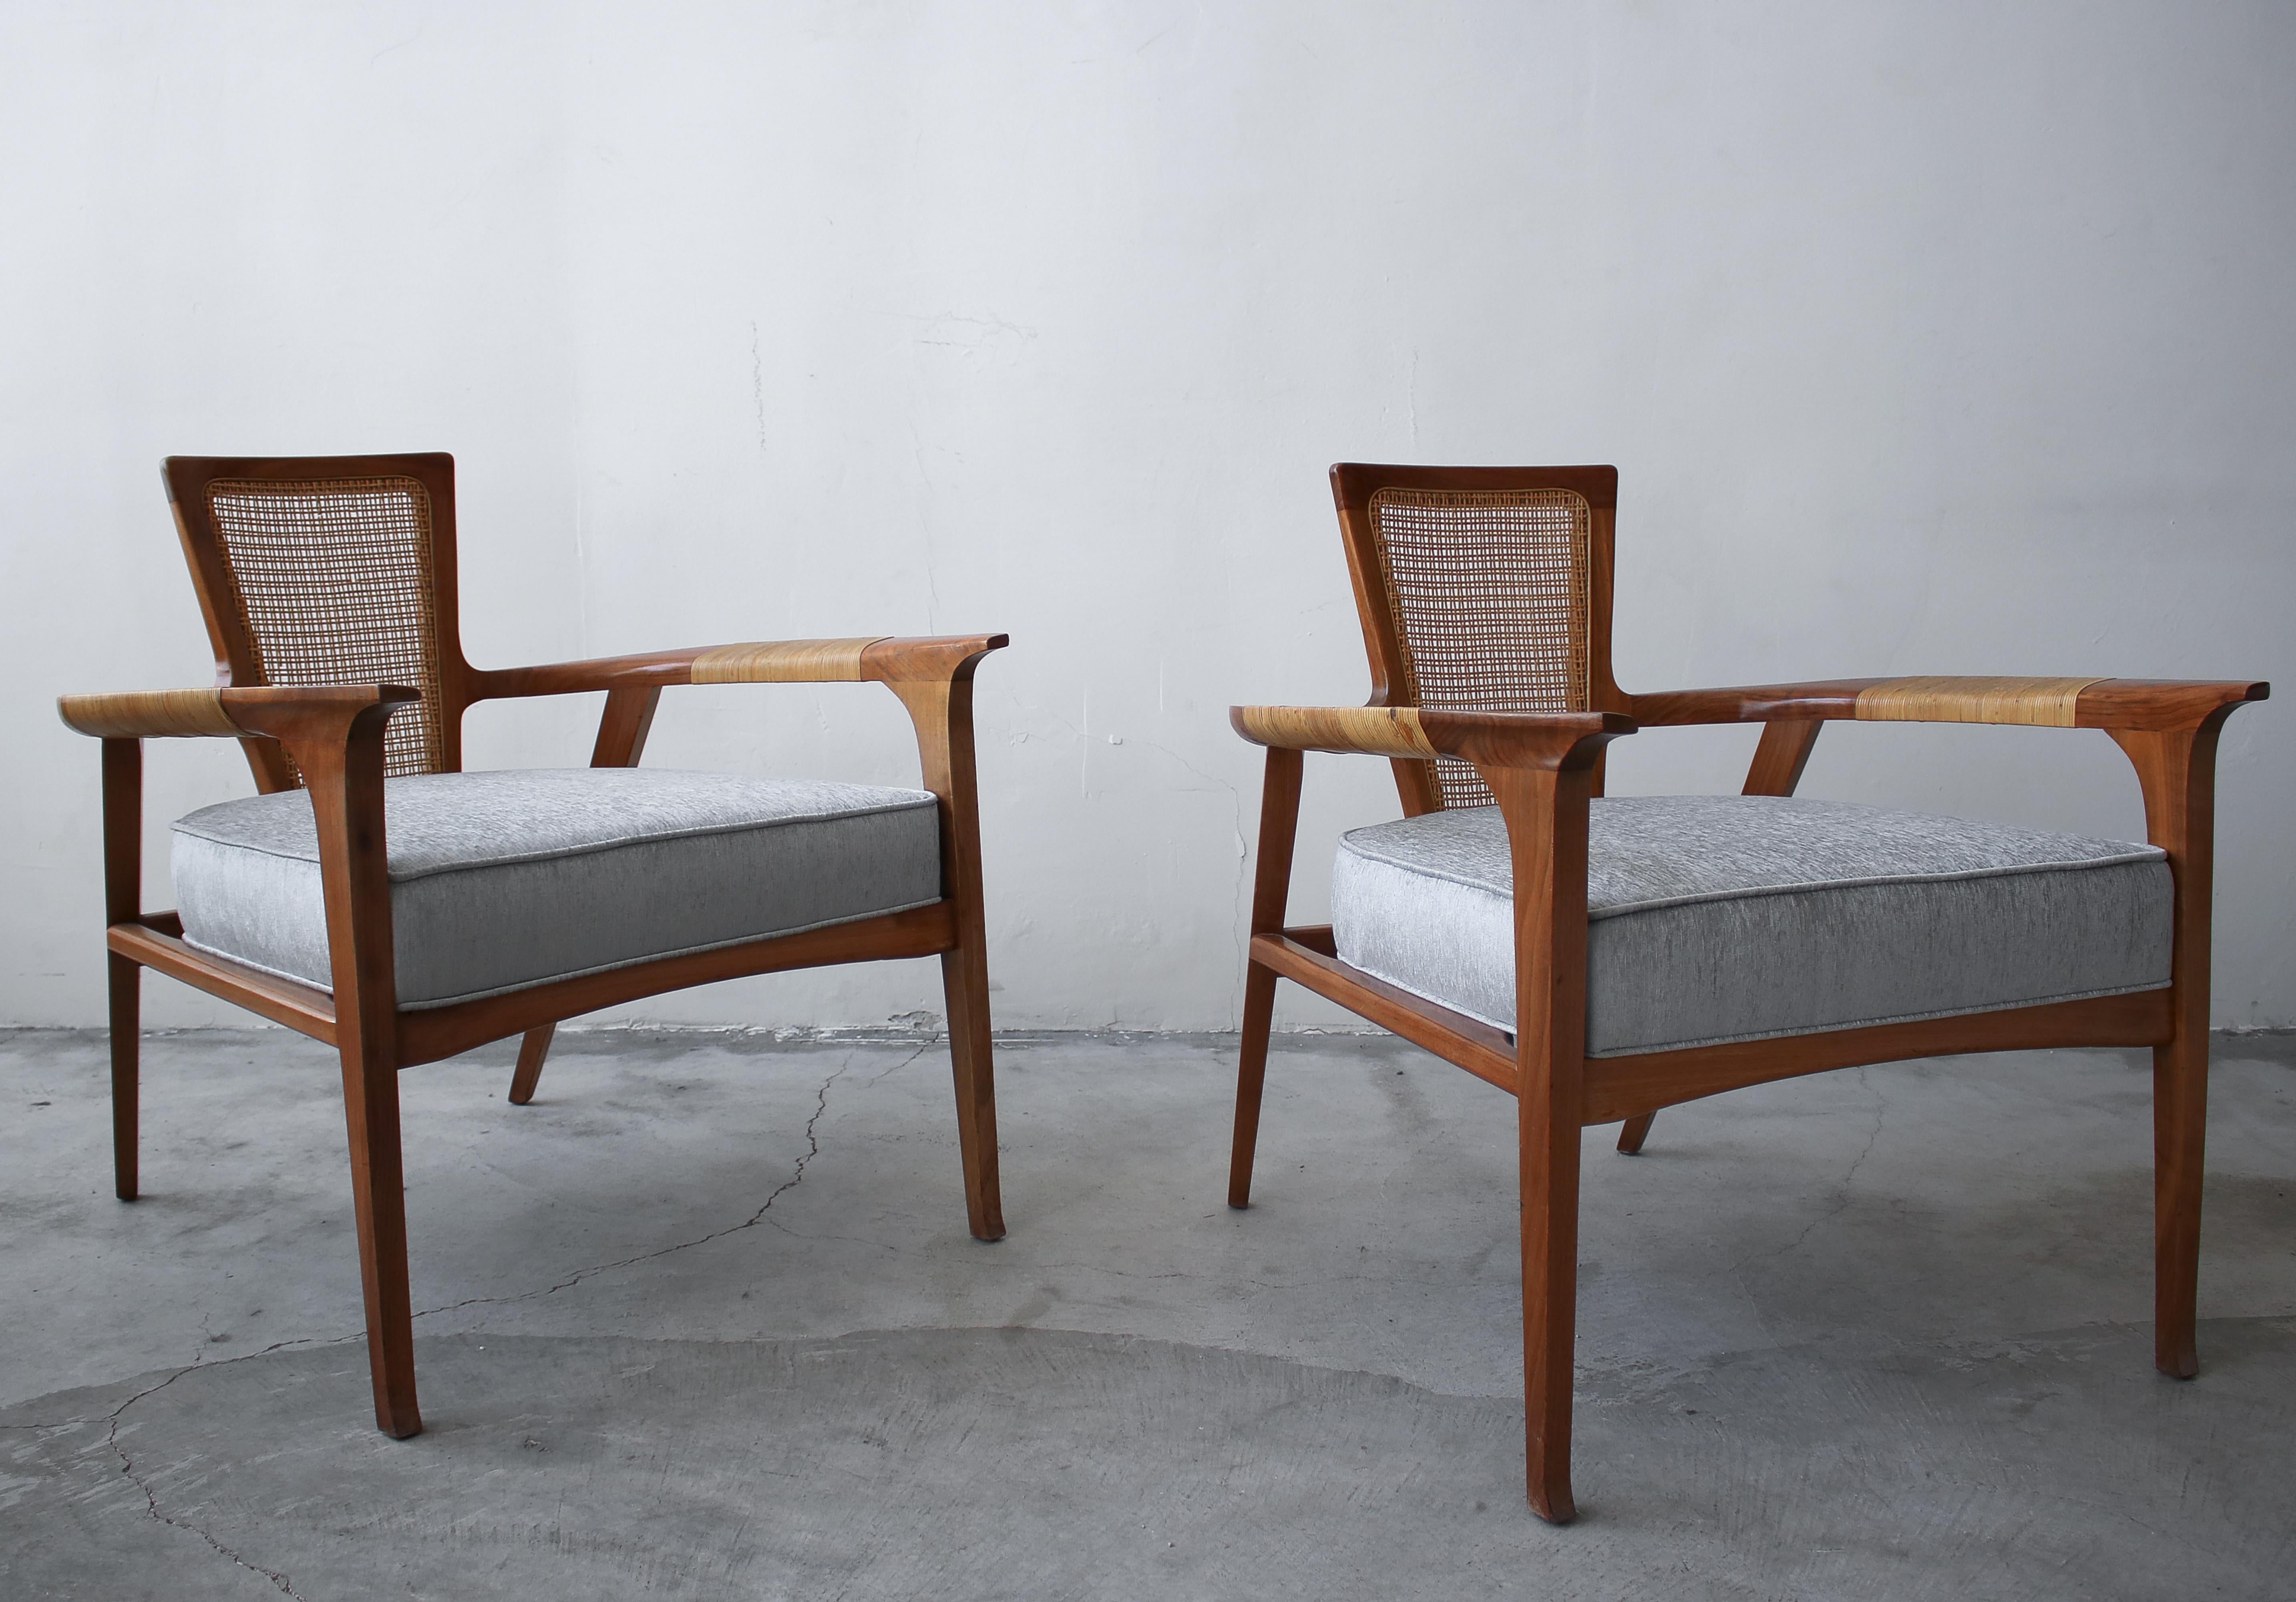 This extremely rare and sculptural pair of midcentury lounge chairs was designed by William Hinn for The Urban Furniture Company, Swedish Guild Collection. If you've been looking for a gorgeous pair of statement chairs with the most amazing details